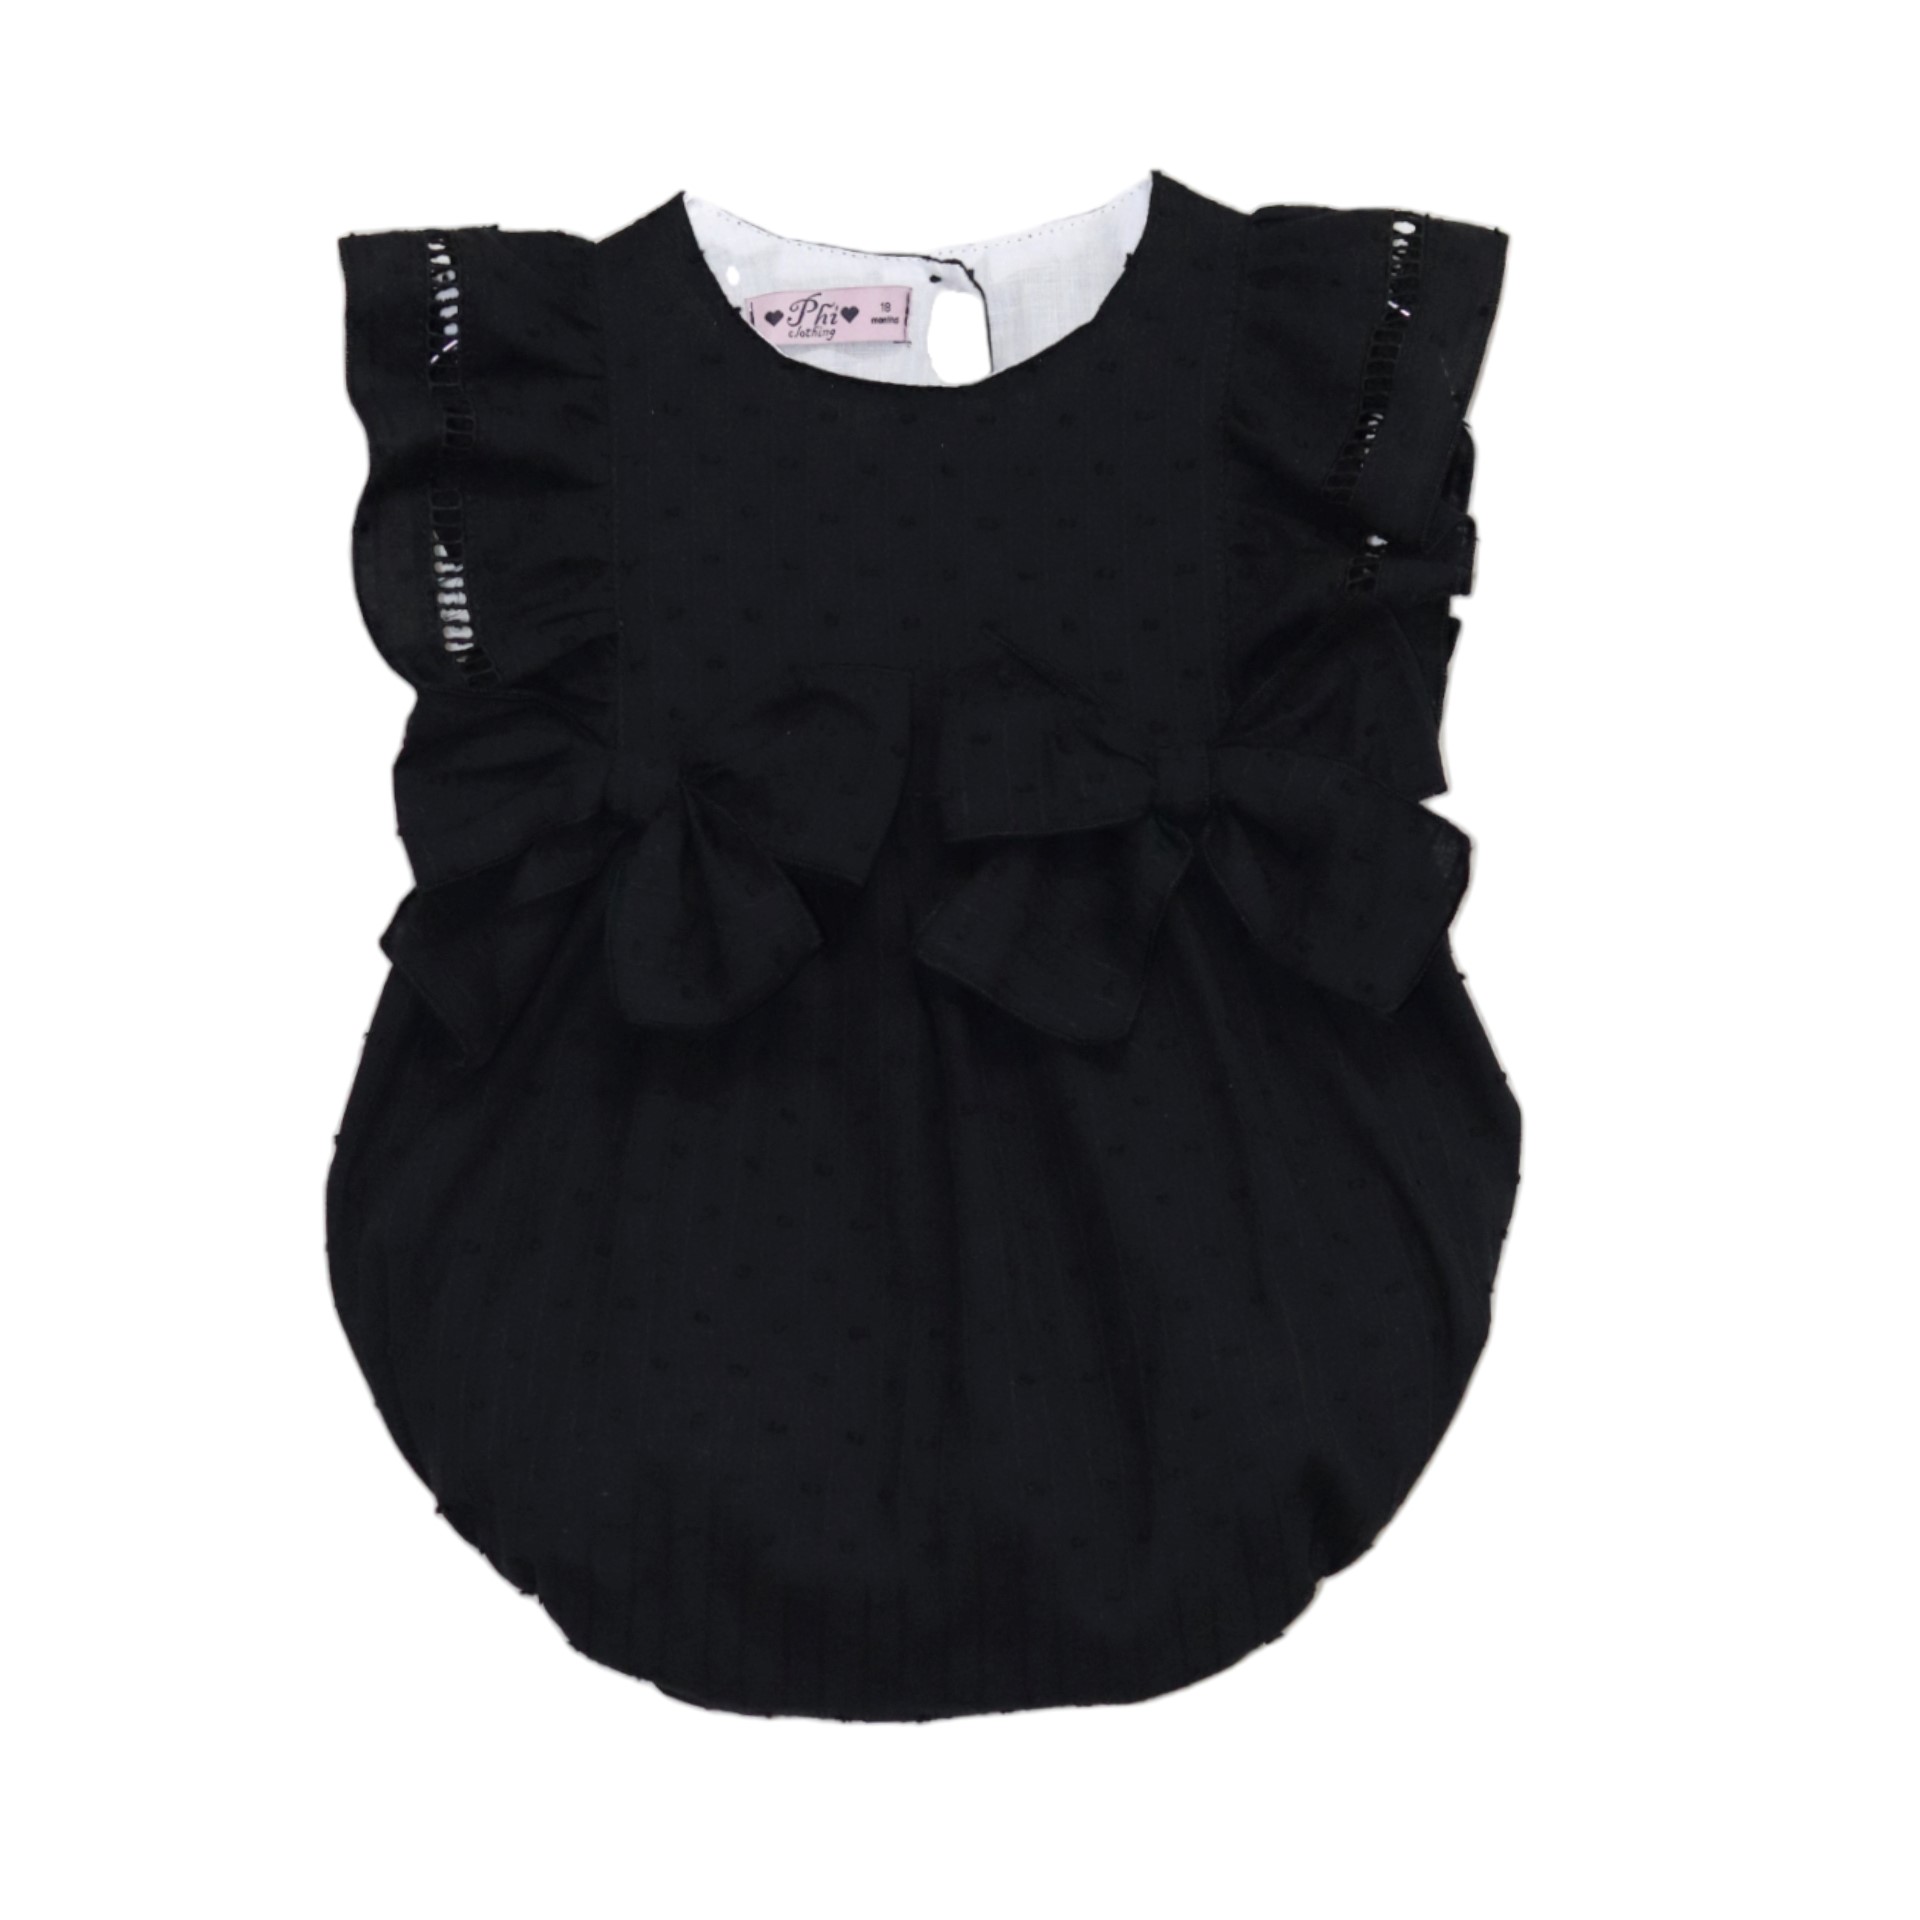 Black Romper with two bows